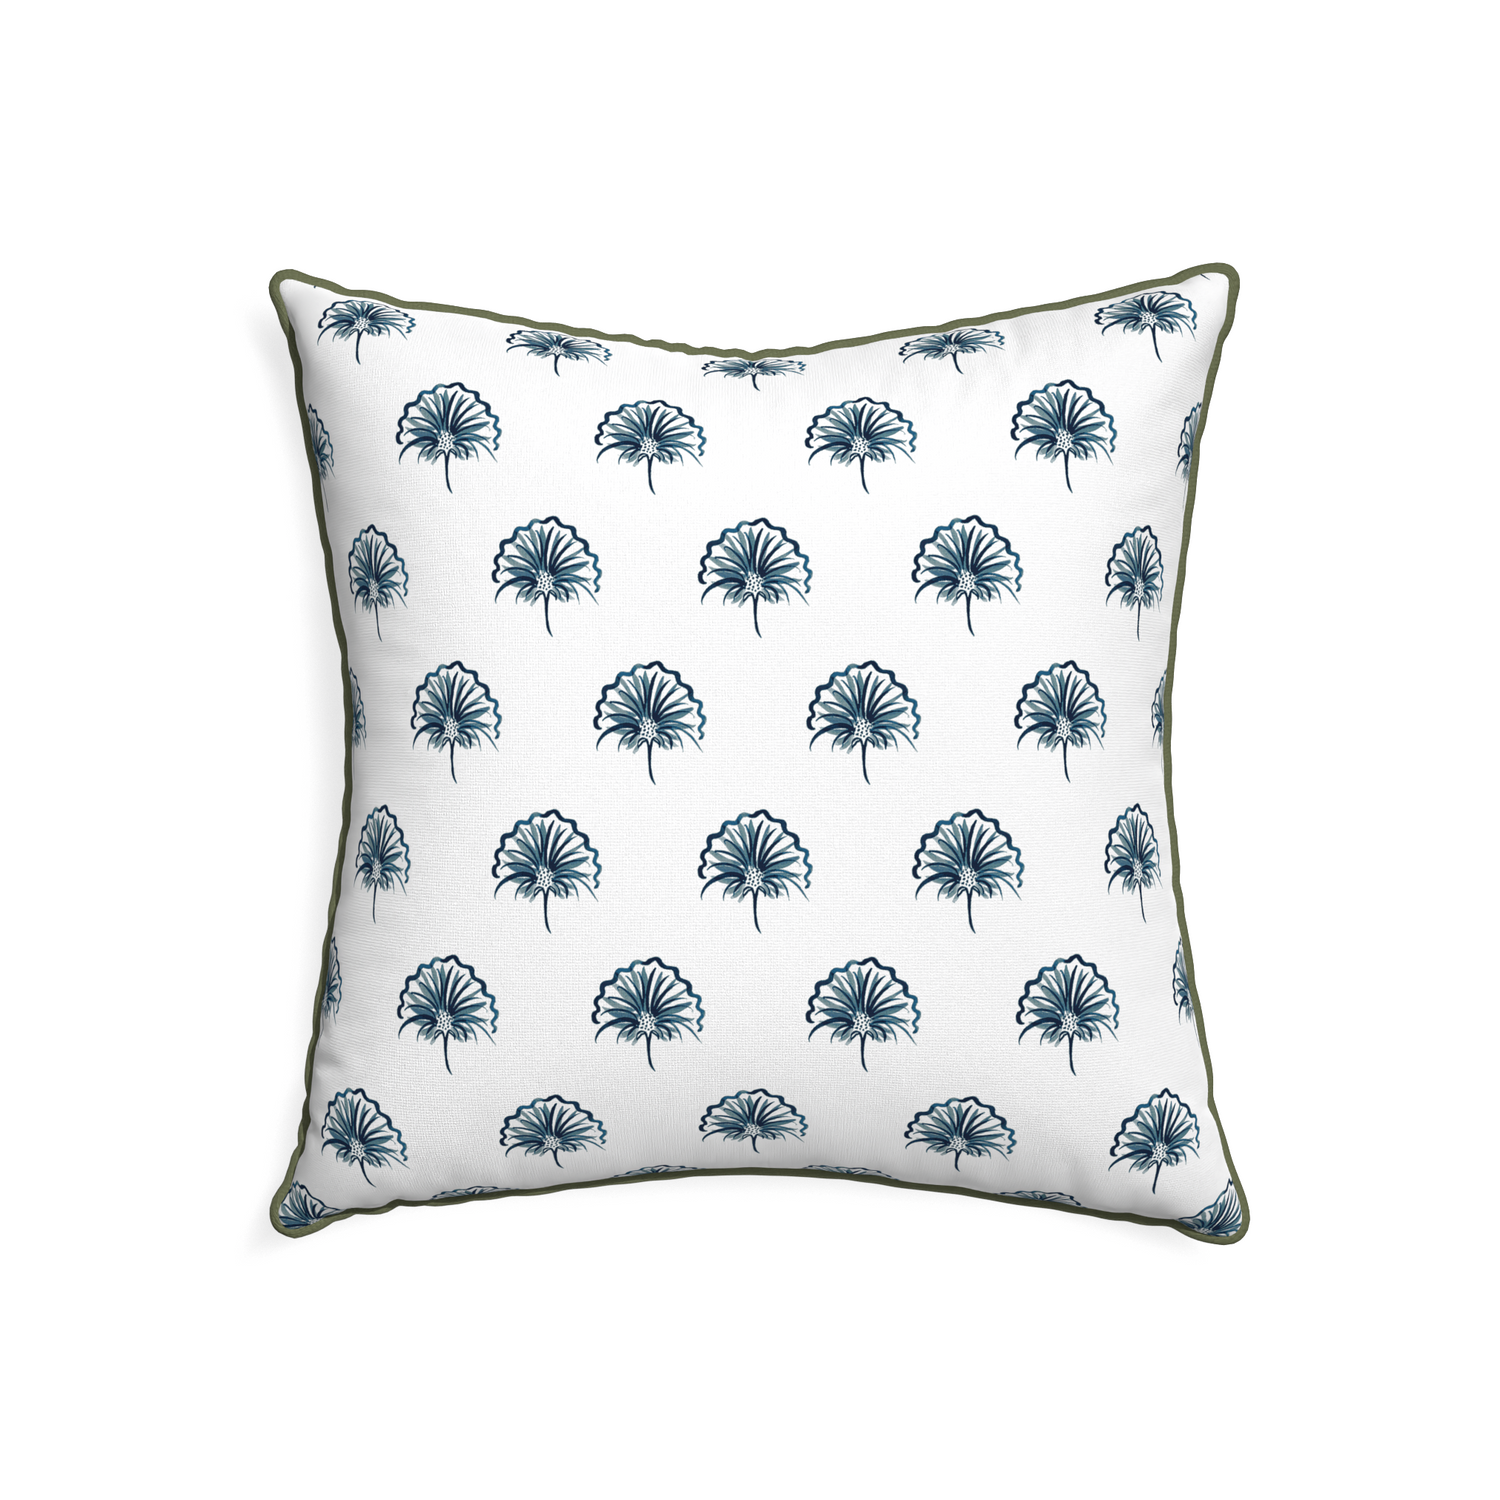 22-square penelope midnight custom floral navypillow with f piping on white background